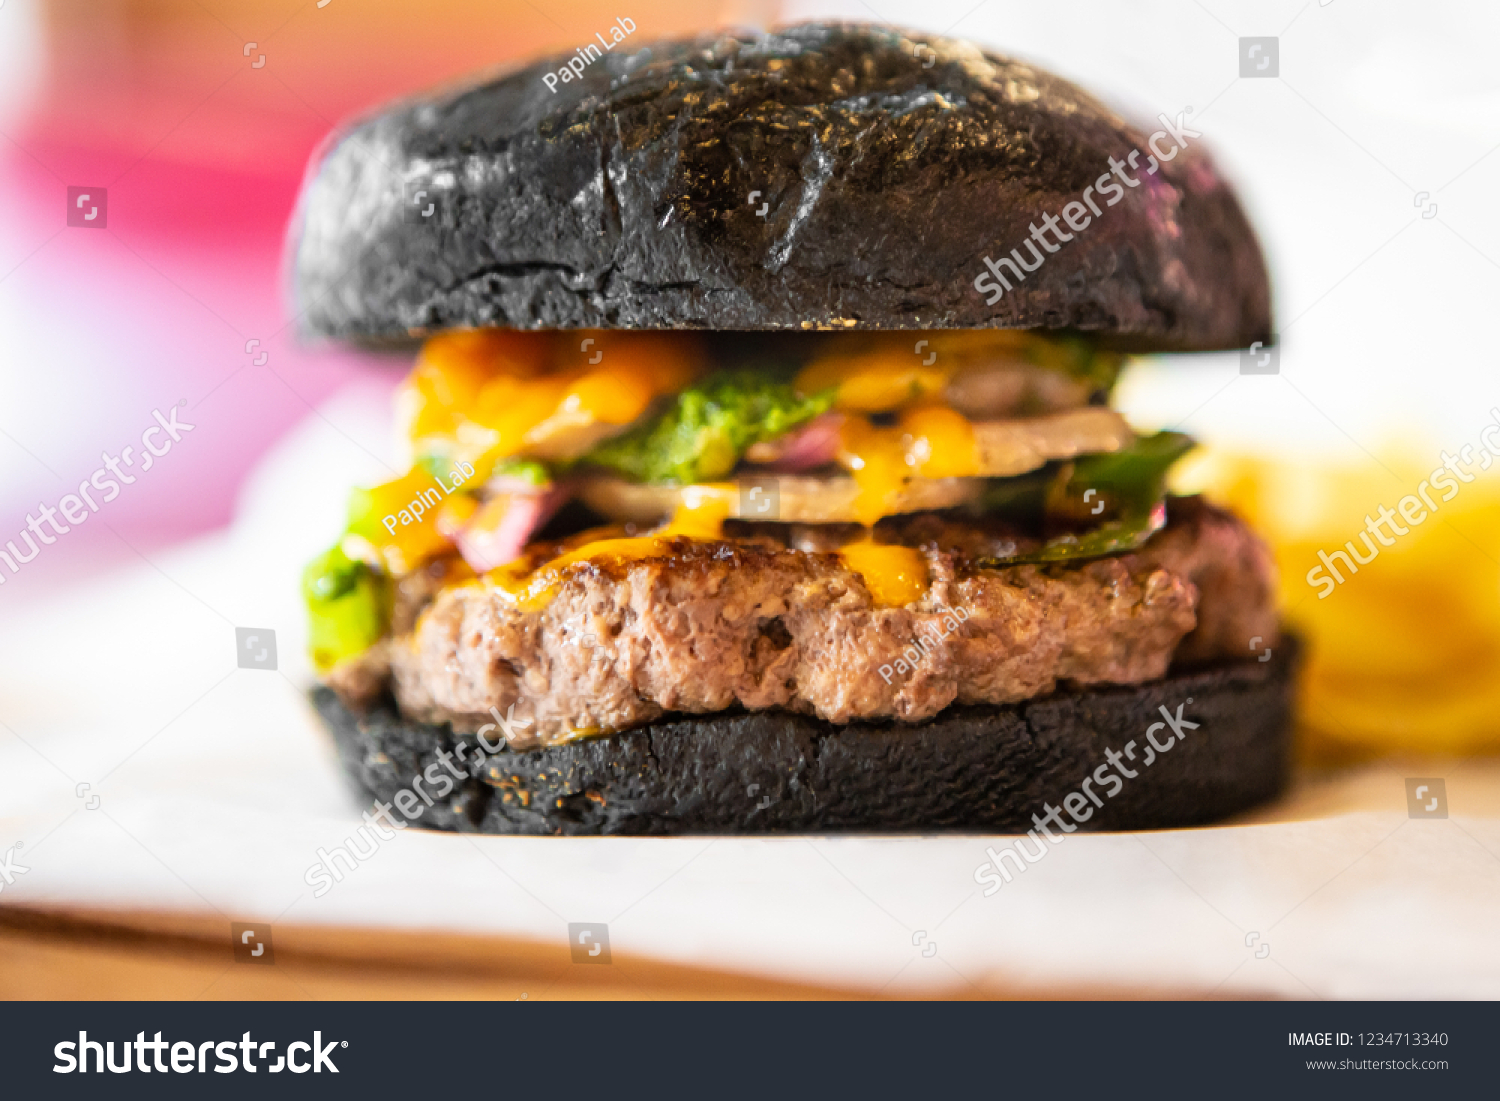 Big Black Tasty Sandwich - Hamburger Or American Burger With Beef, Pickles, Tomato And Sauce On Table. Concept Fast And Unhealthy Food, Unhealthy Eating. #1234713340